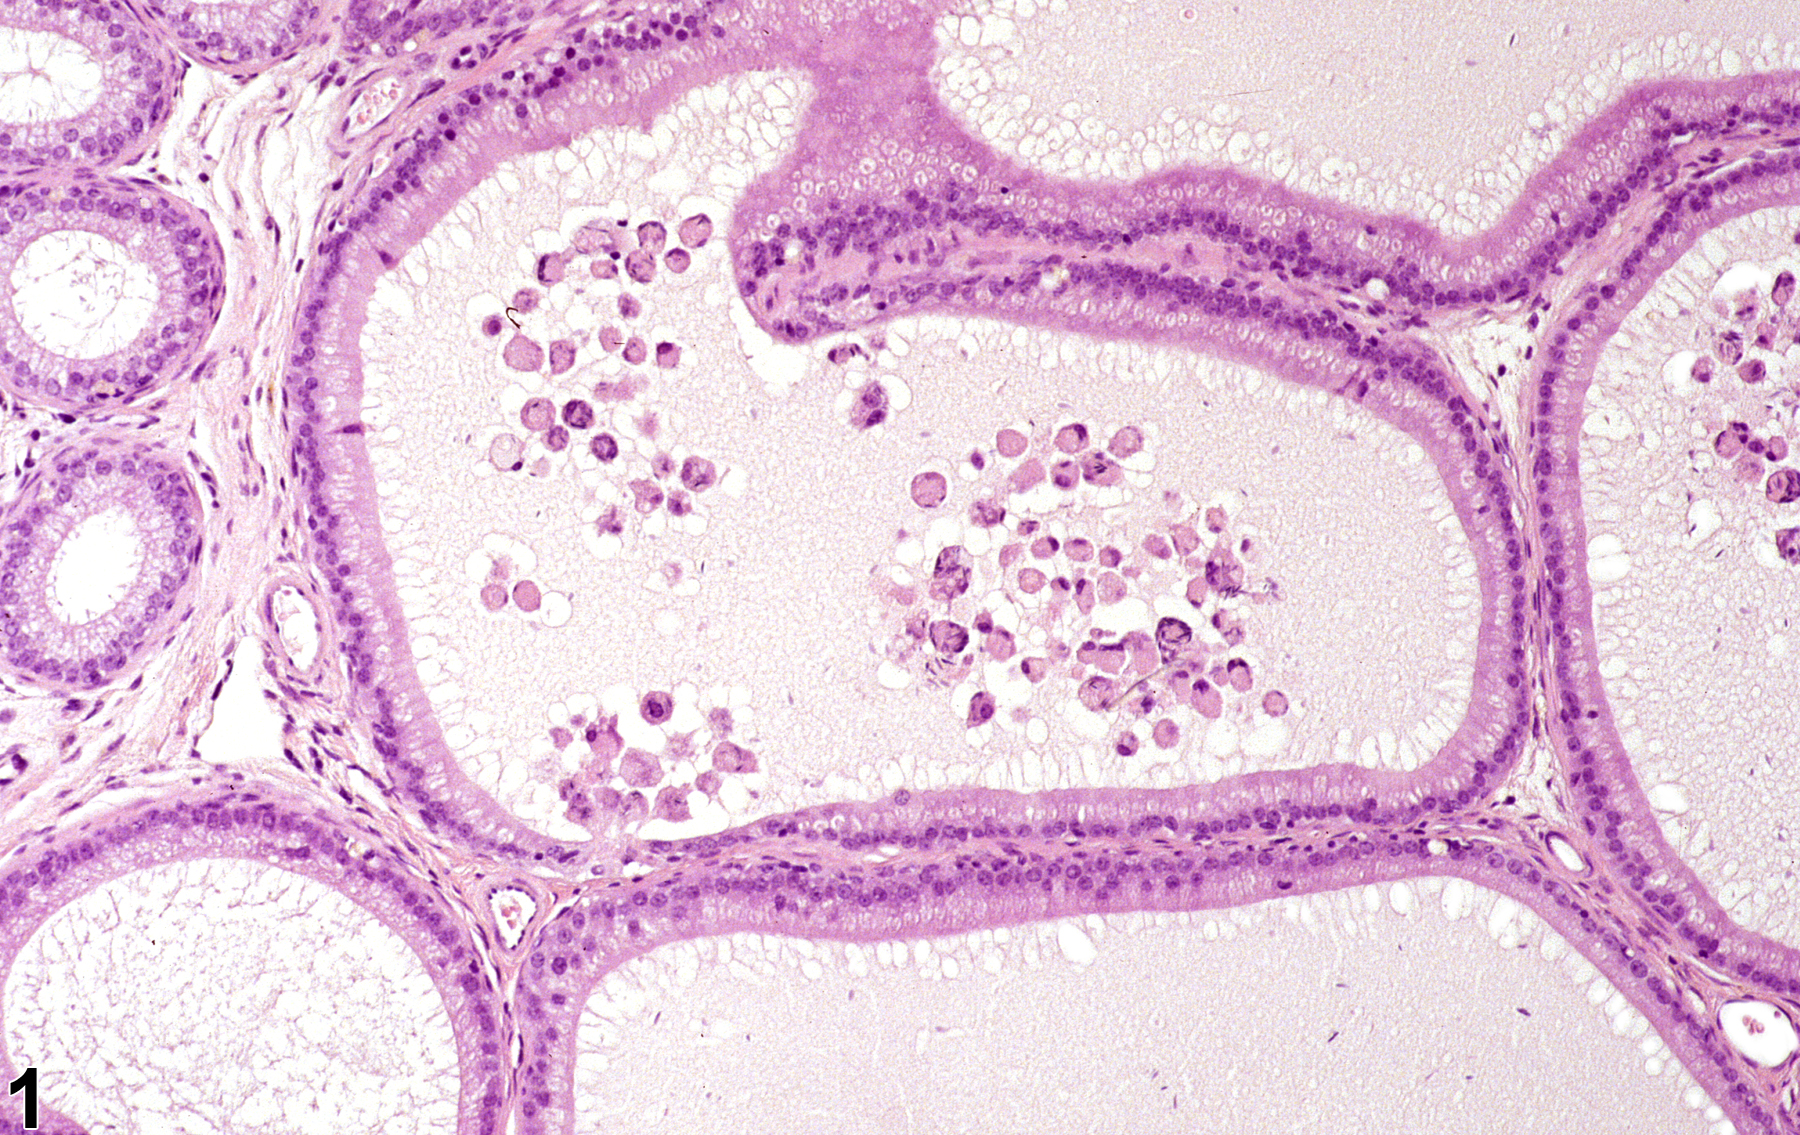 Image of epithelial degeneration in the epididymis from a male B6C3F1 mouse in a chronic study